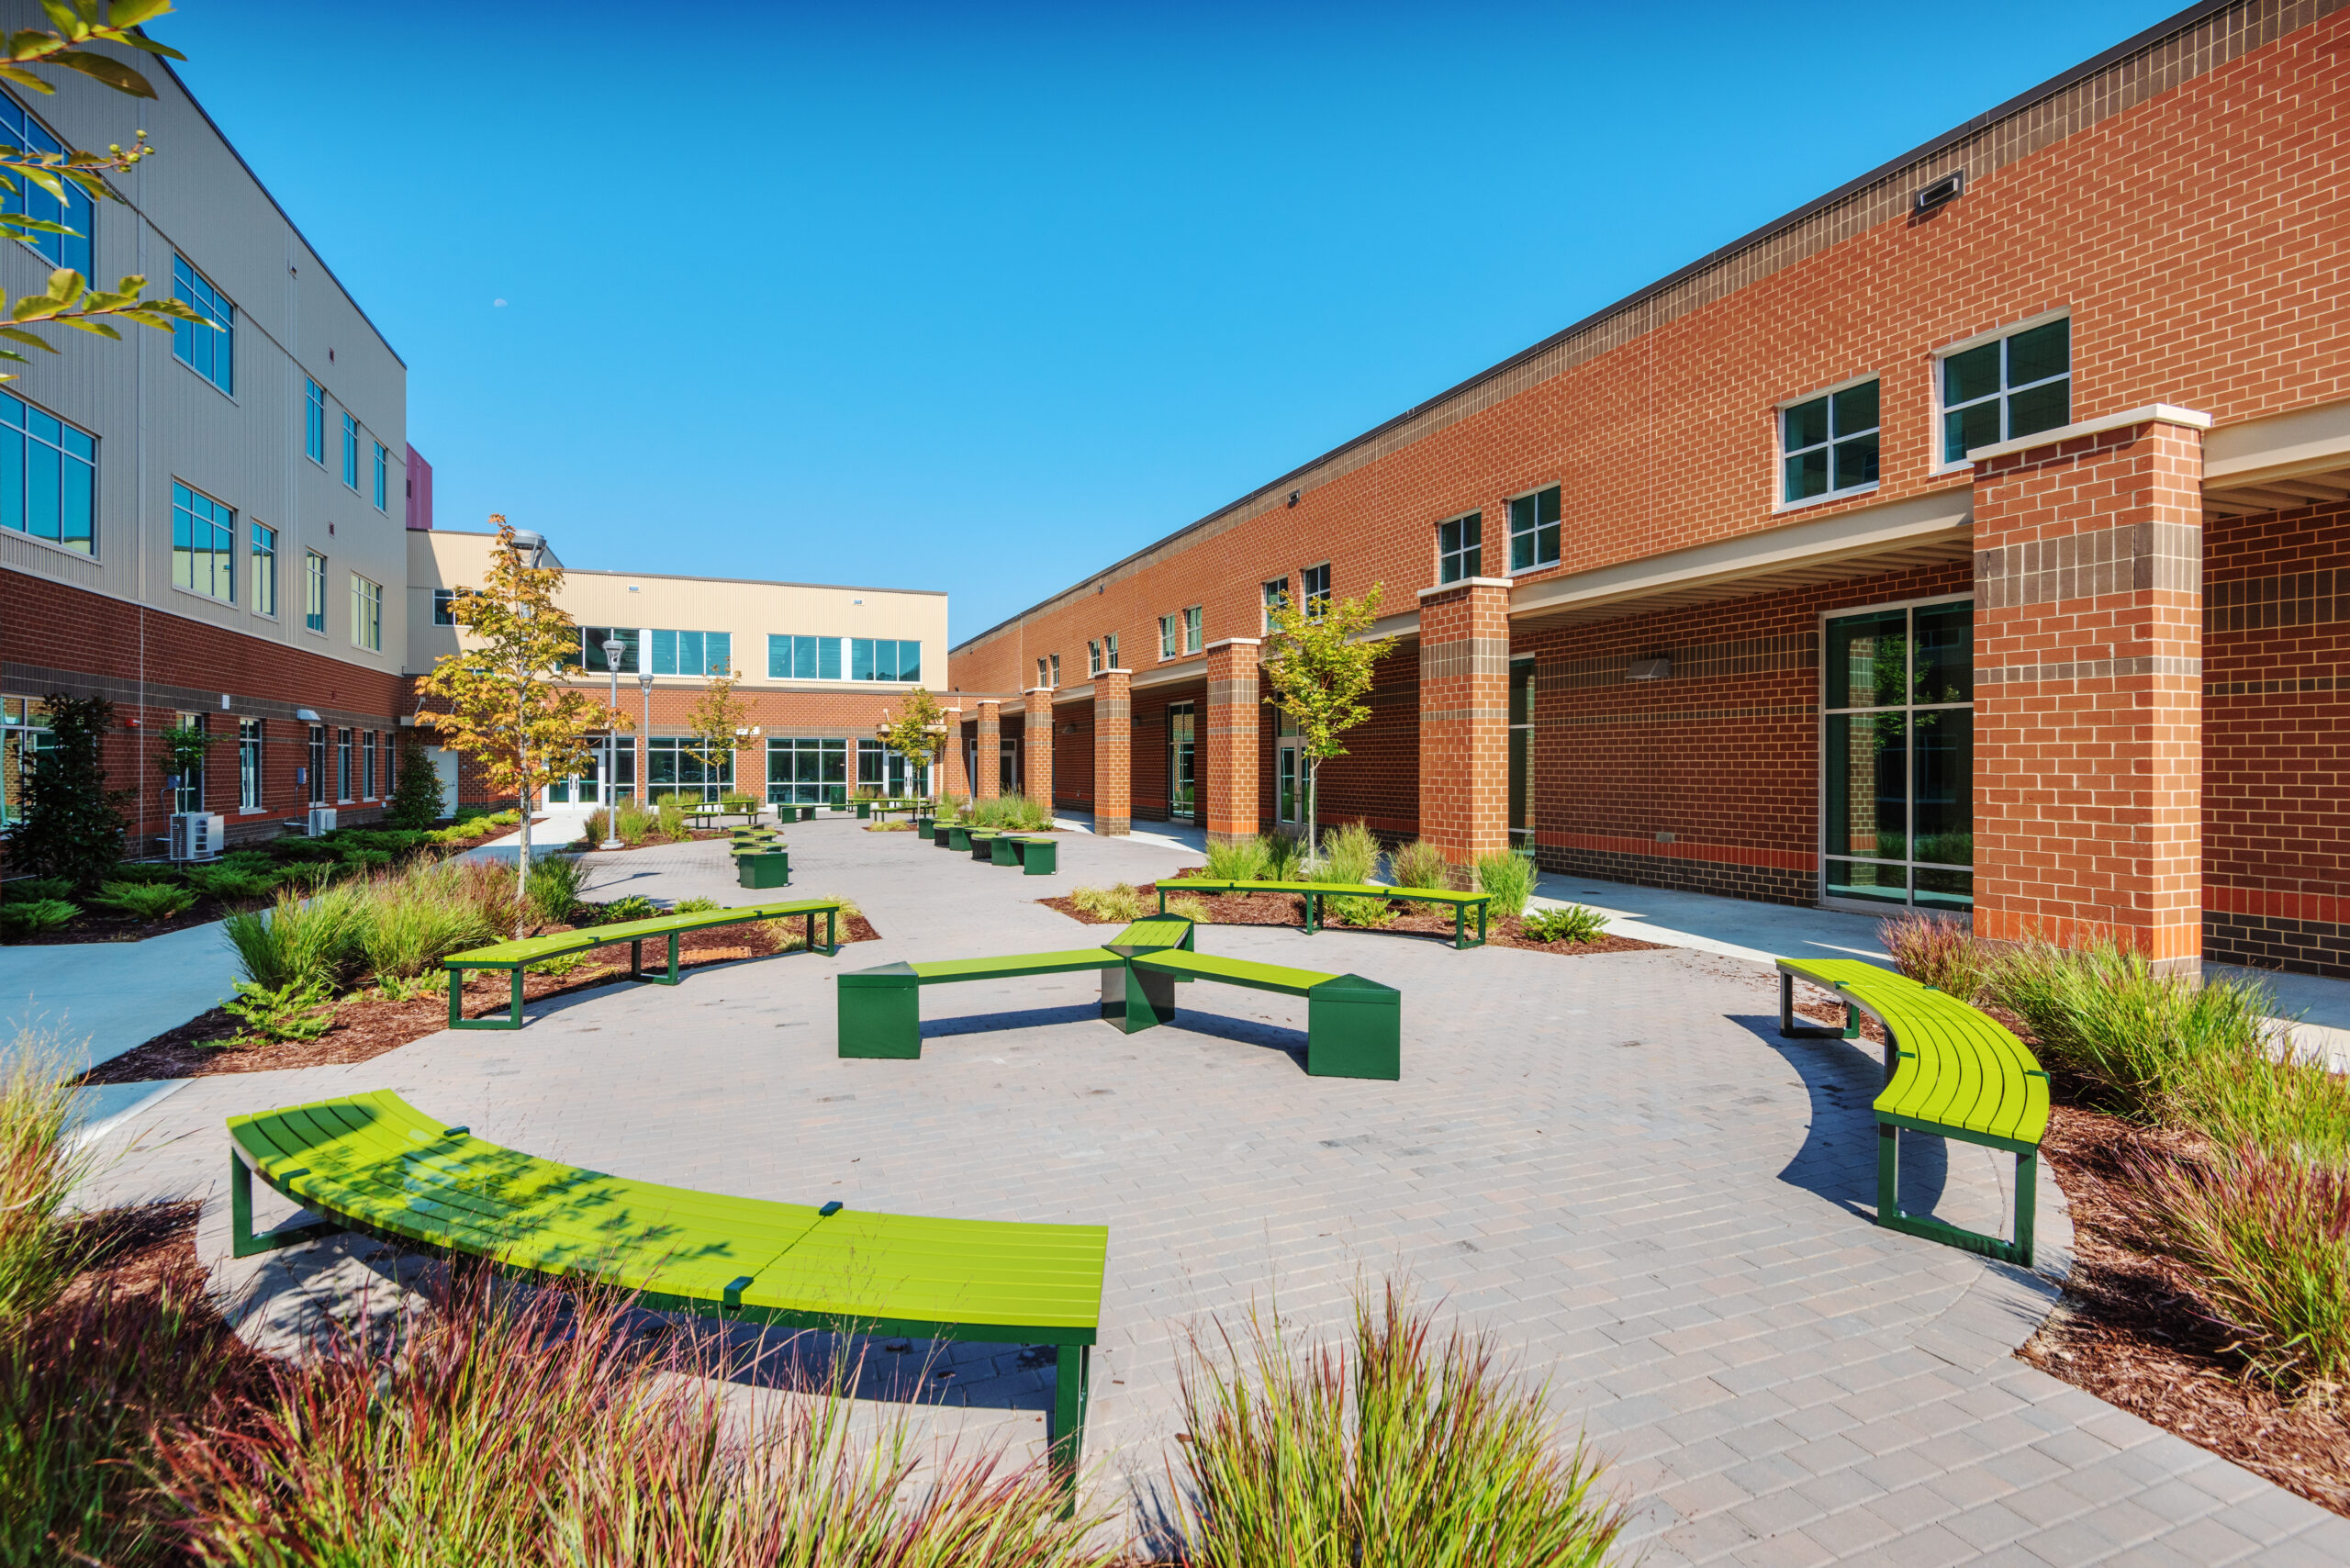 Neuse River Middle School Courtyard with Lime Green Benches